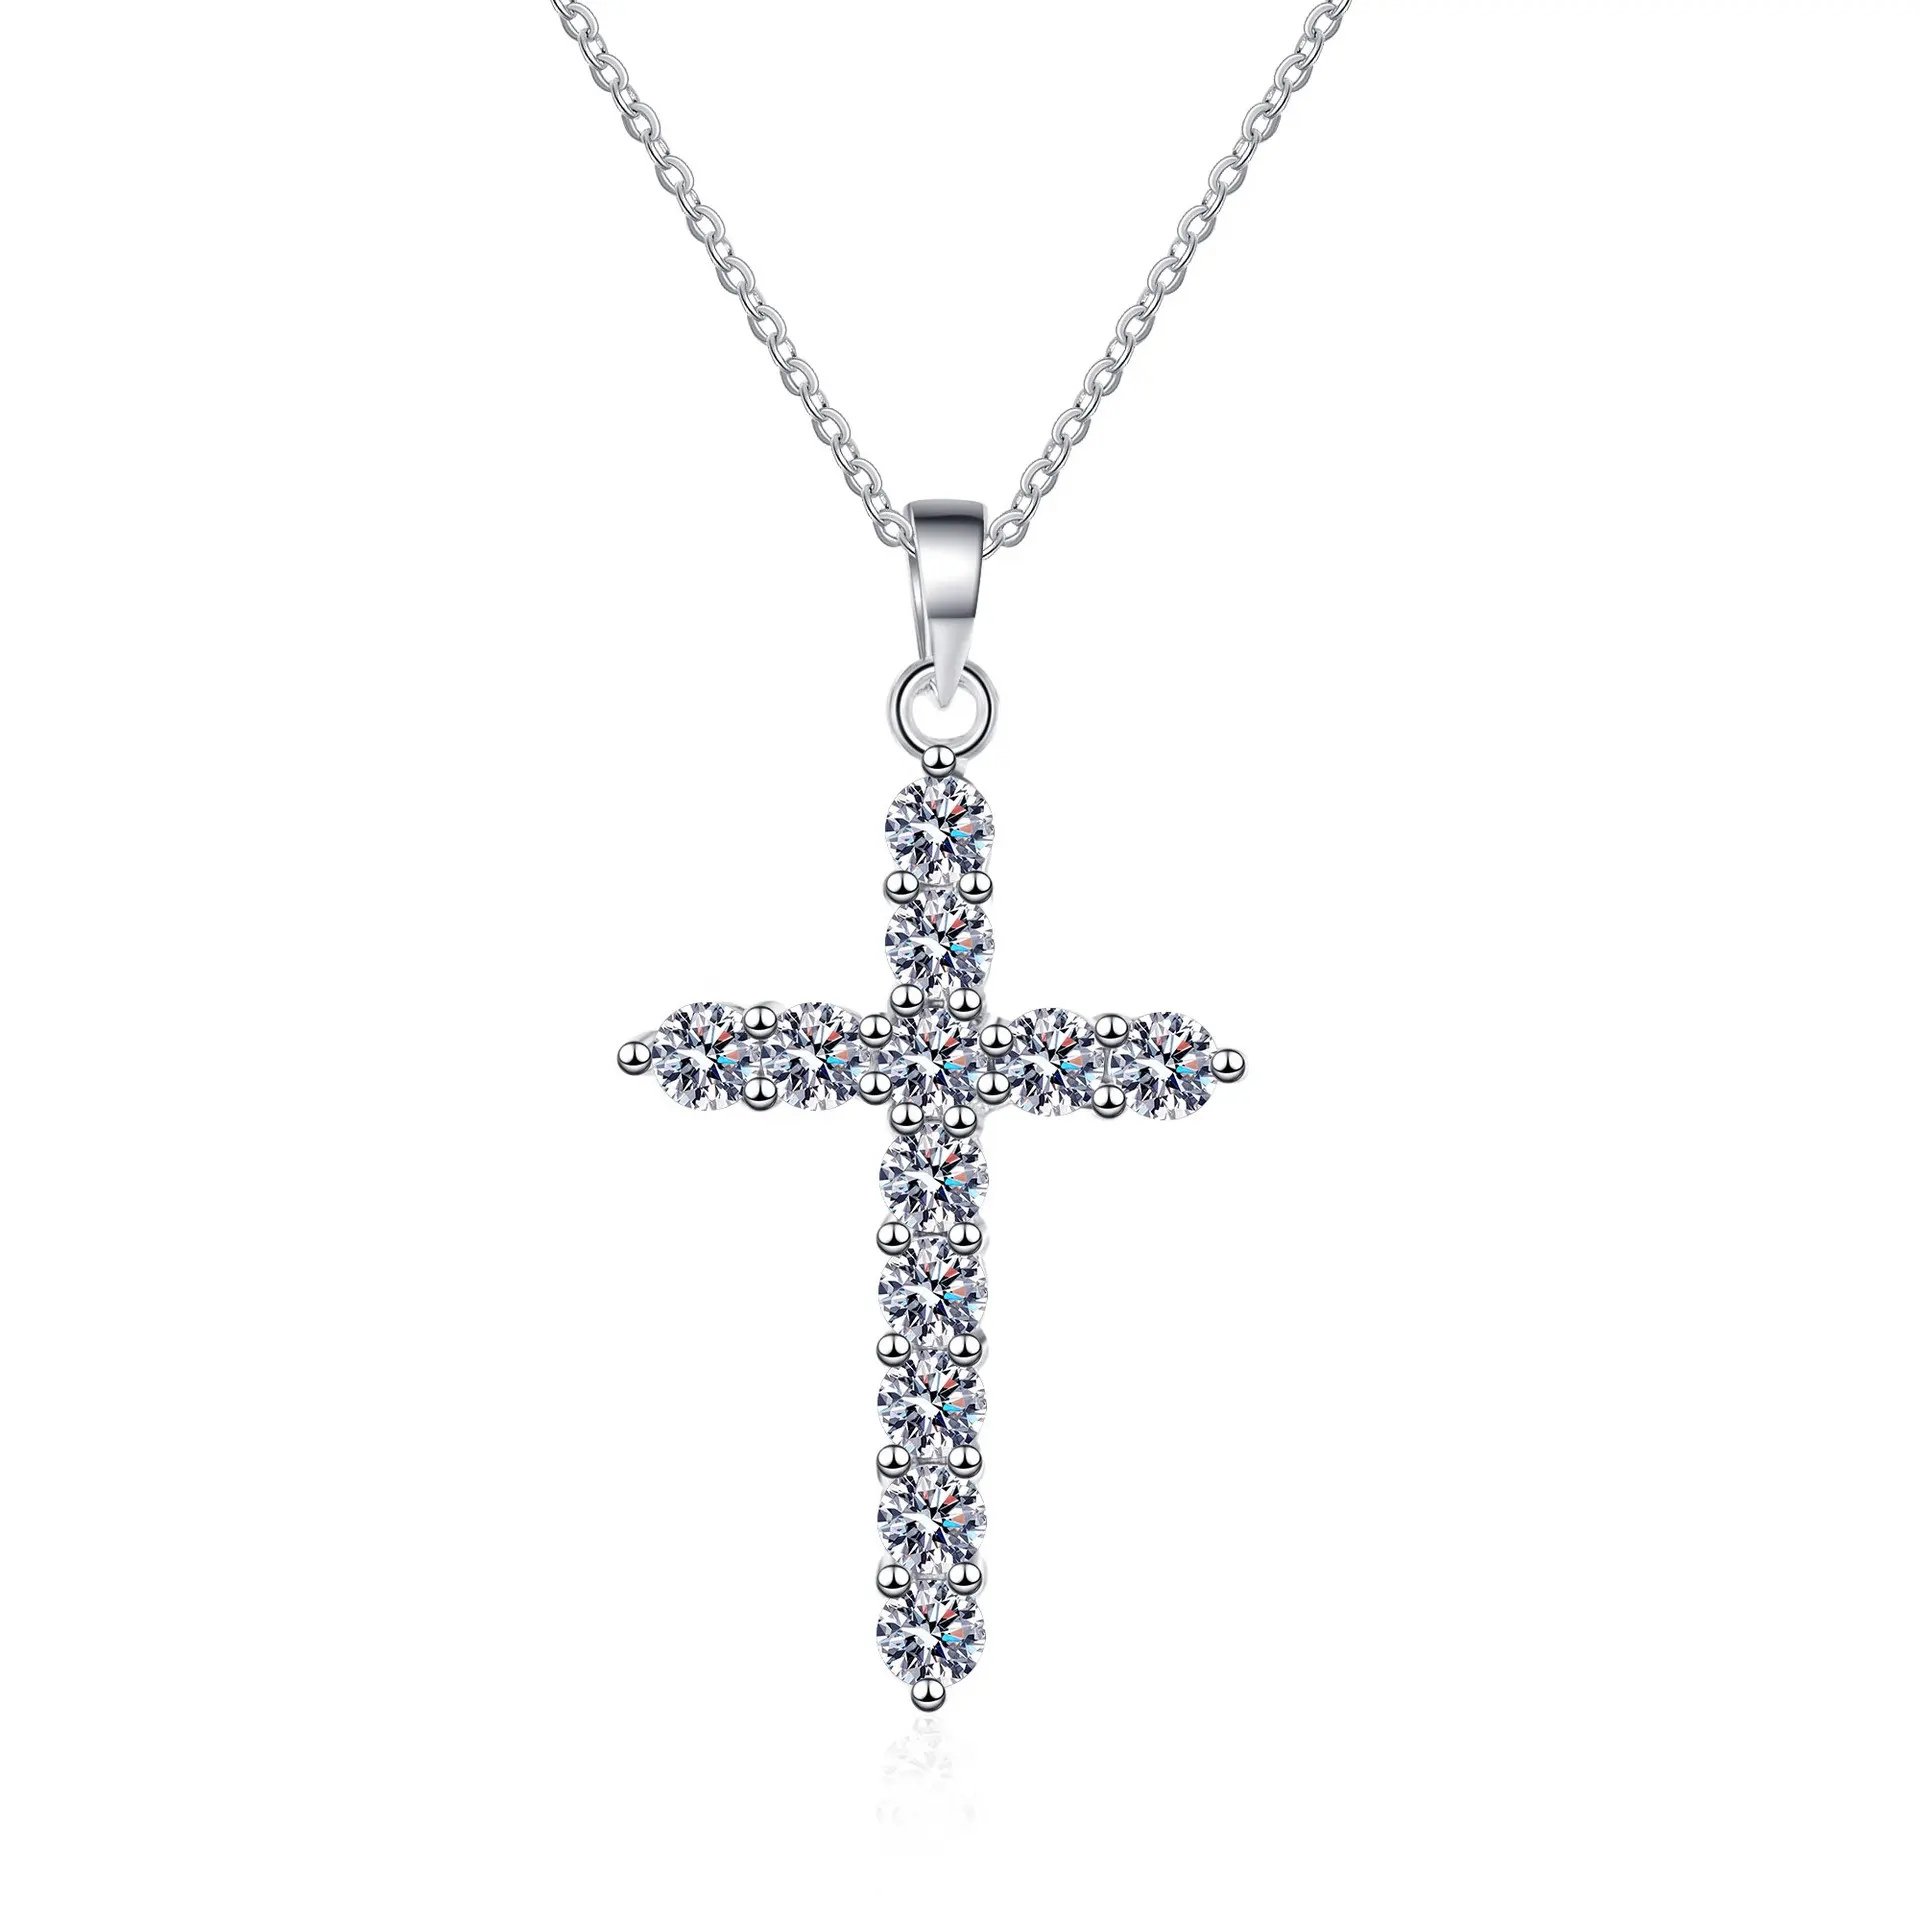 Fashion Moissanite Jewelry Diamond Cross Necklace S925 Sterling Silver Moissanite Hip Hop Jewelry